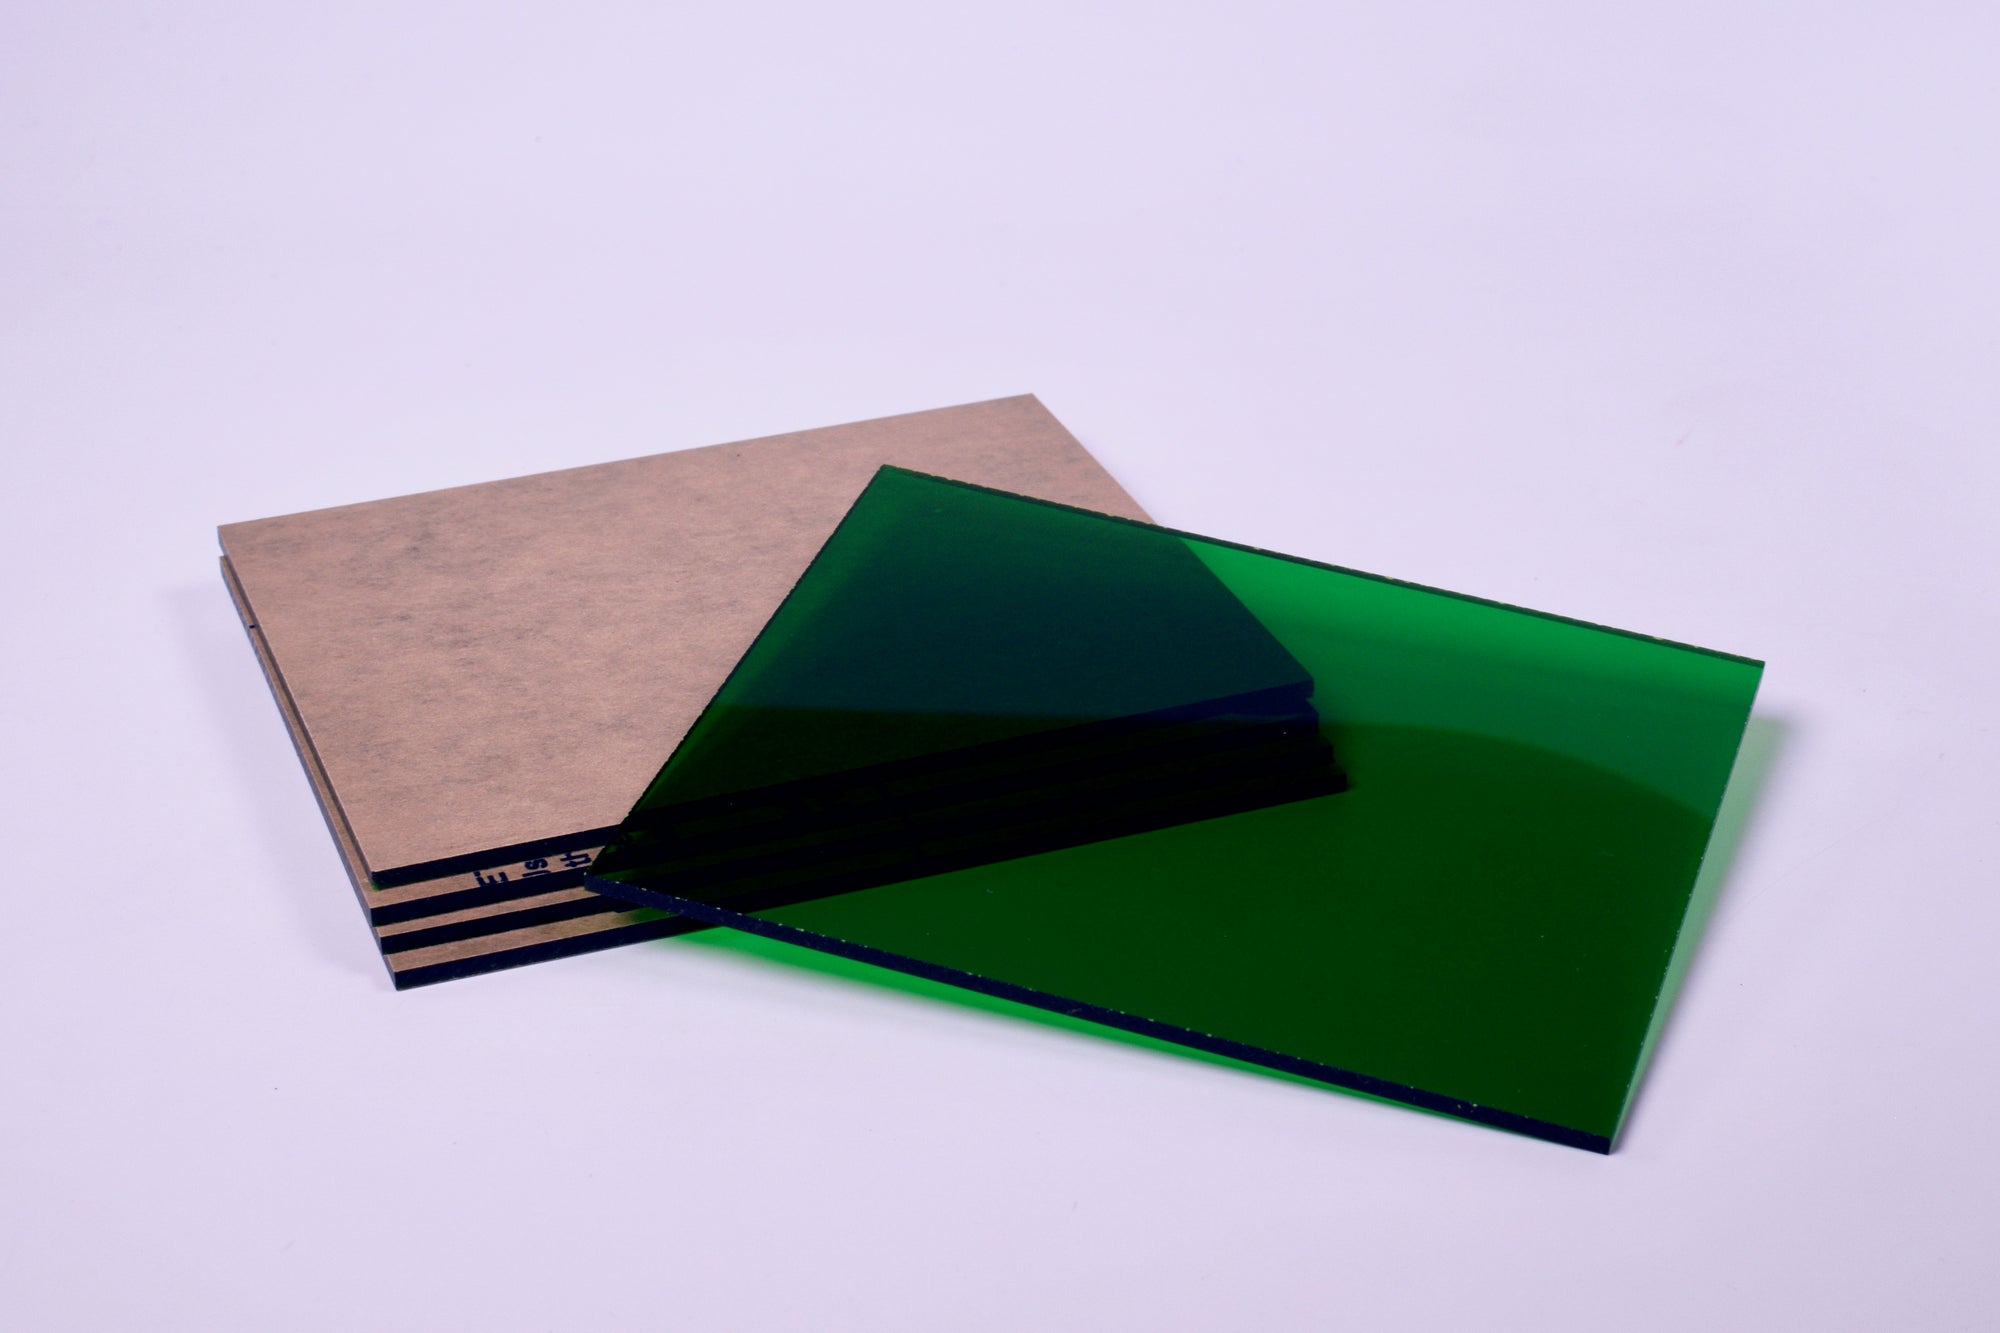 3mm Black Acrylic Sheet Manufacturers, Fournisseurs - Customized